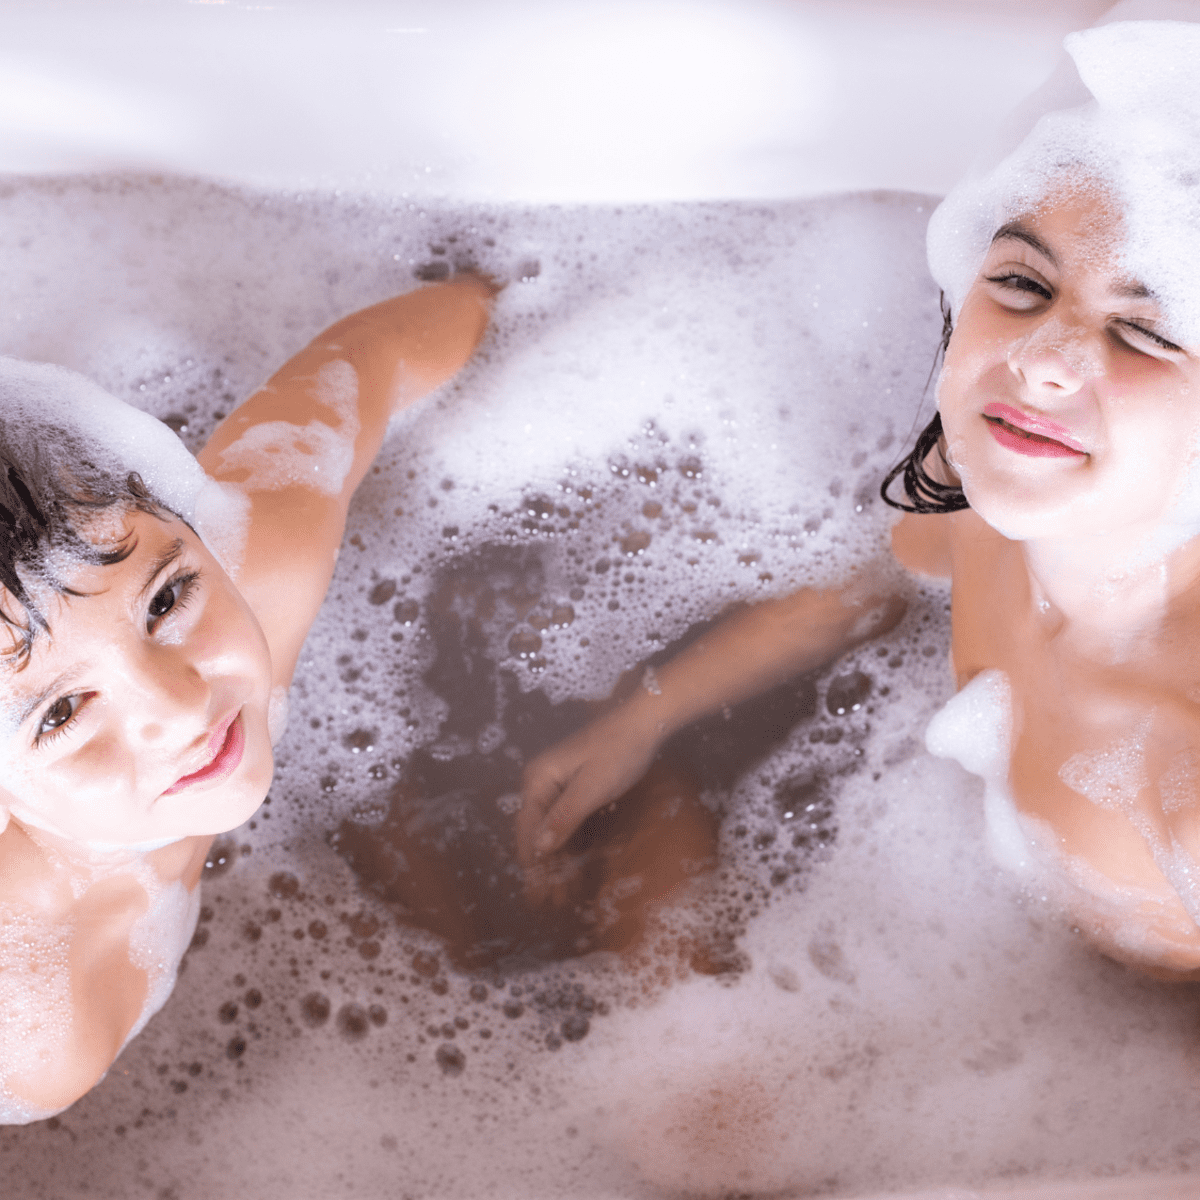 https://images.saymedia-content.com/.image/ar_1:1%2Cc_fill%2Ccs_srgb%2Cq_auto:eco%2Cw_1200/MTk5MzYyODIyMDg4NTAwNjM4/parents-showering-with-their-kids-its-benefits-and-when-to-stop.png